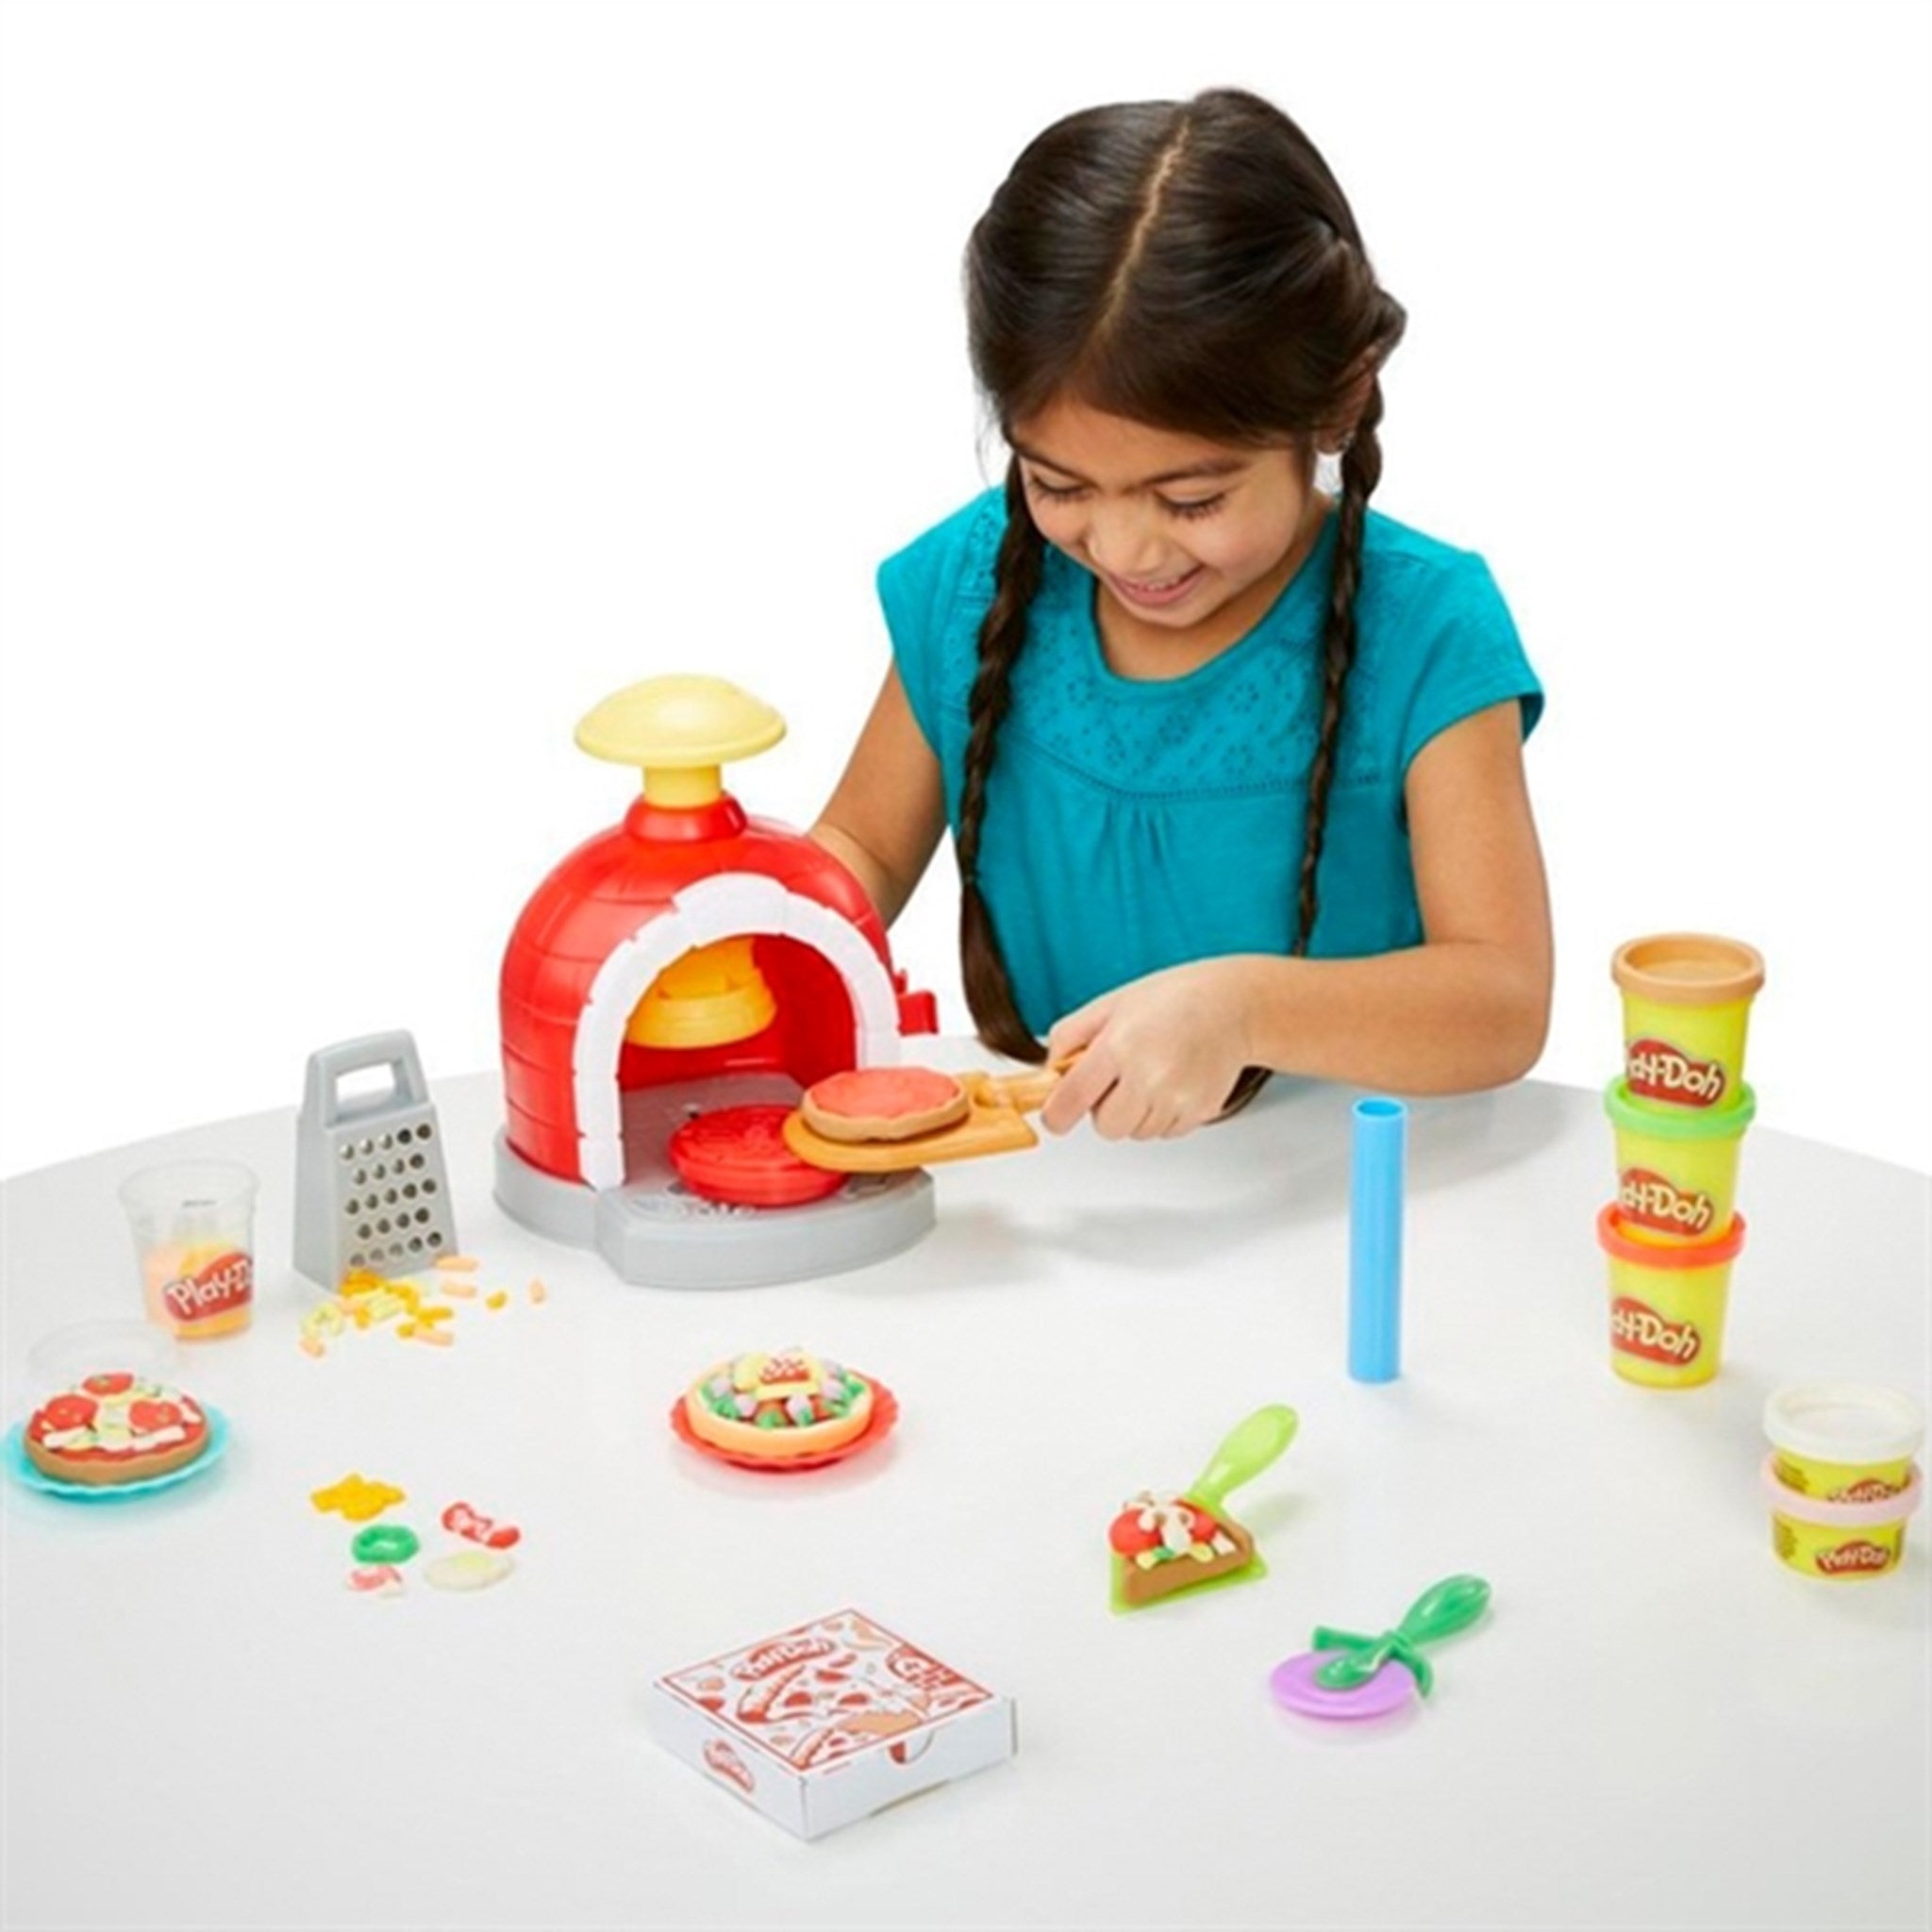 Play-Doh Kitchen Creation - Pizza Oven Playset 2